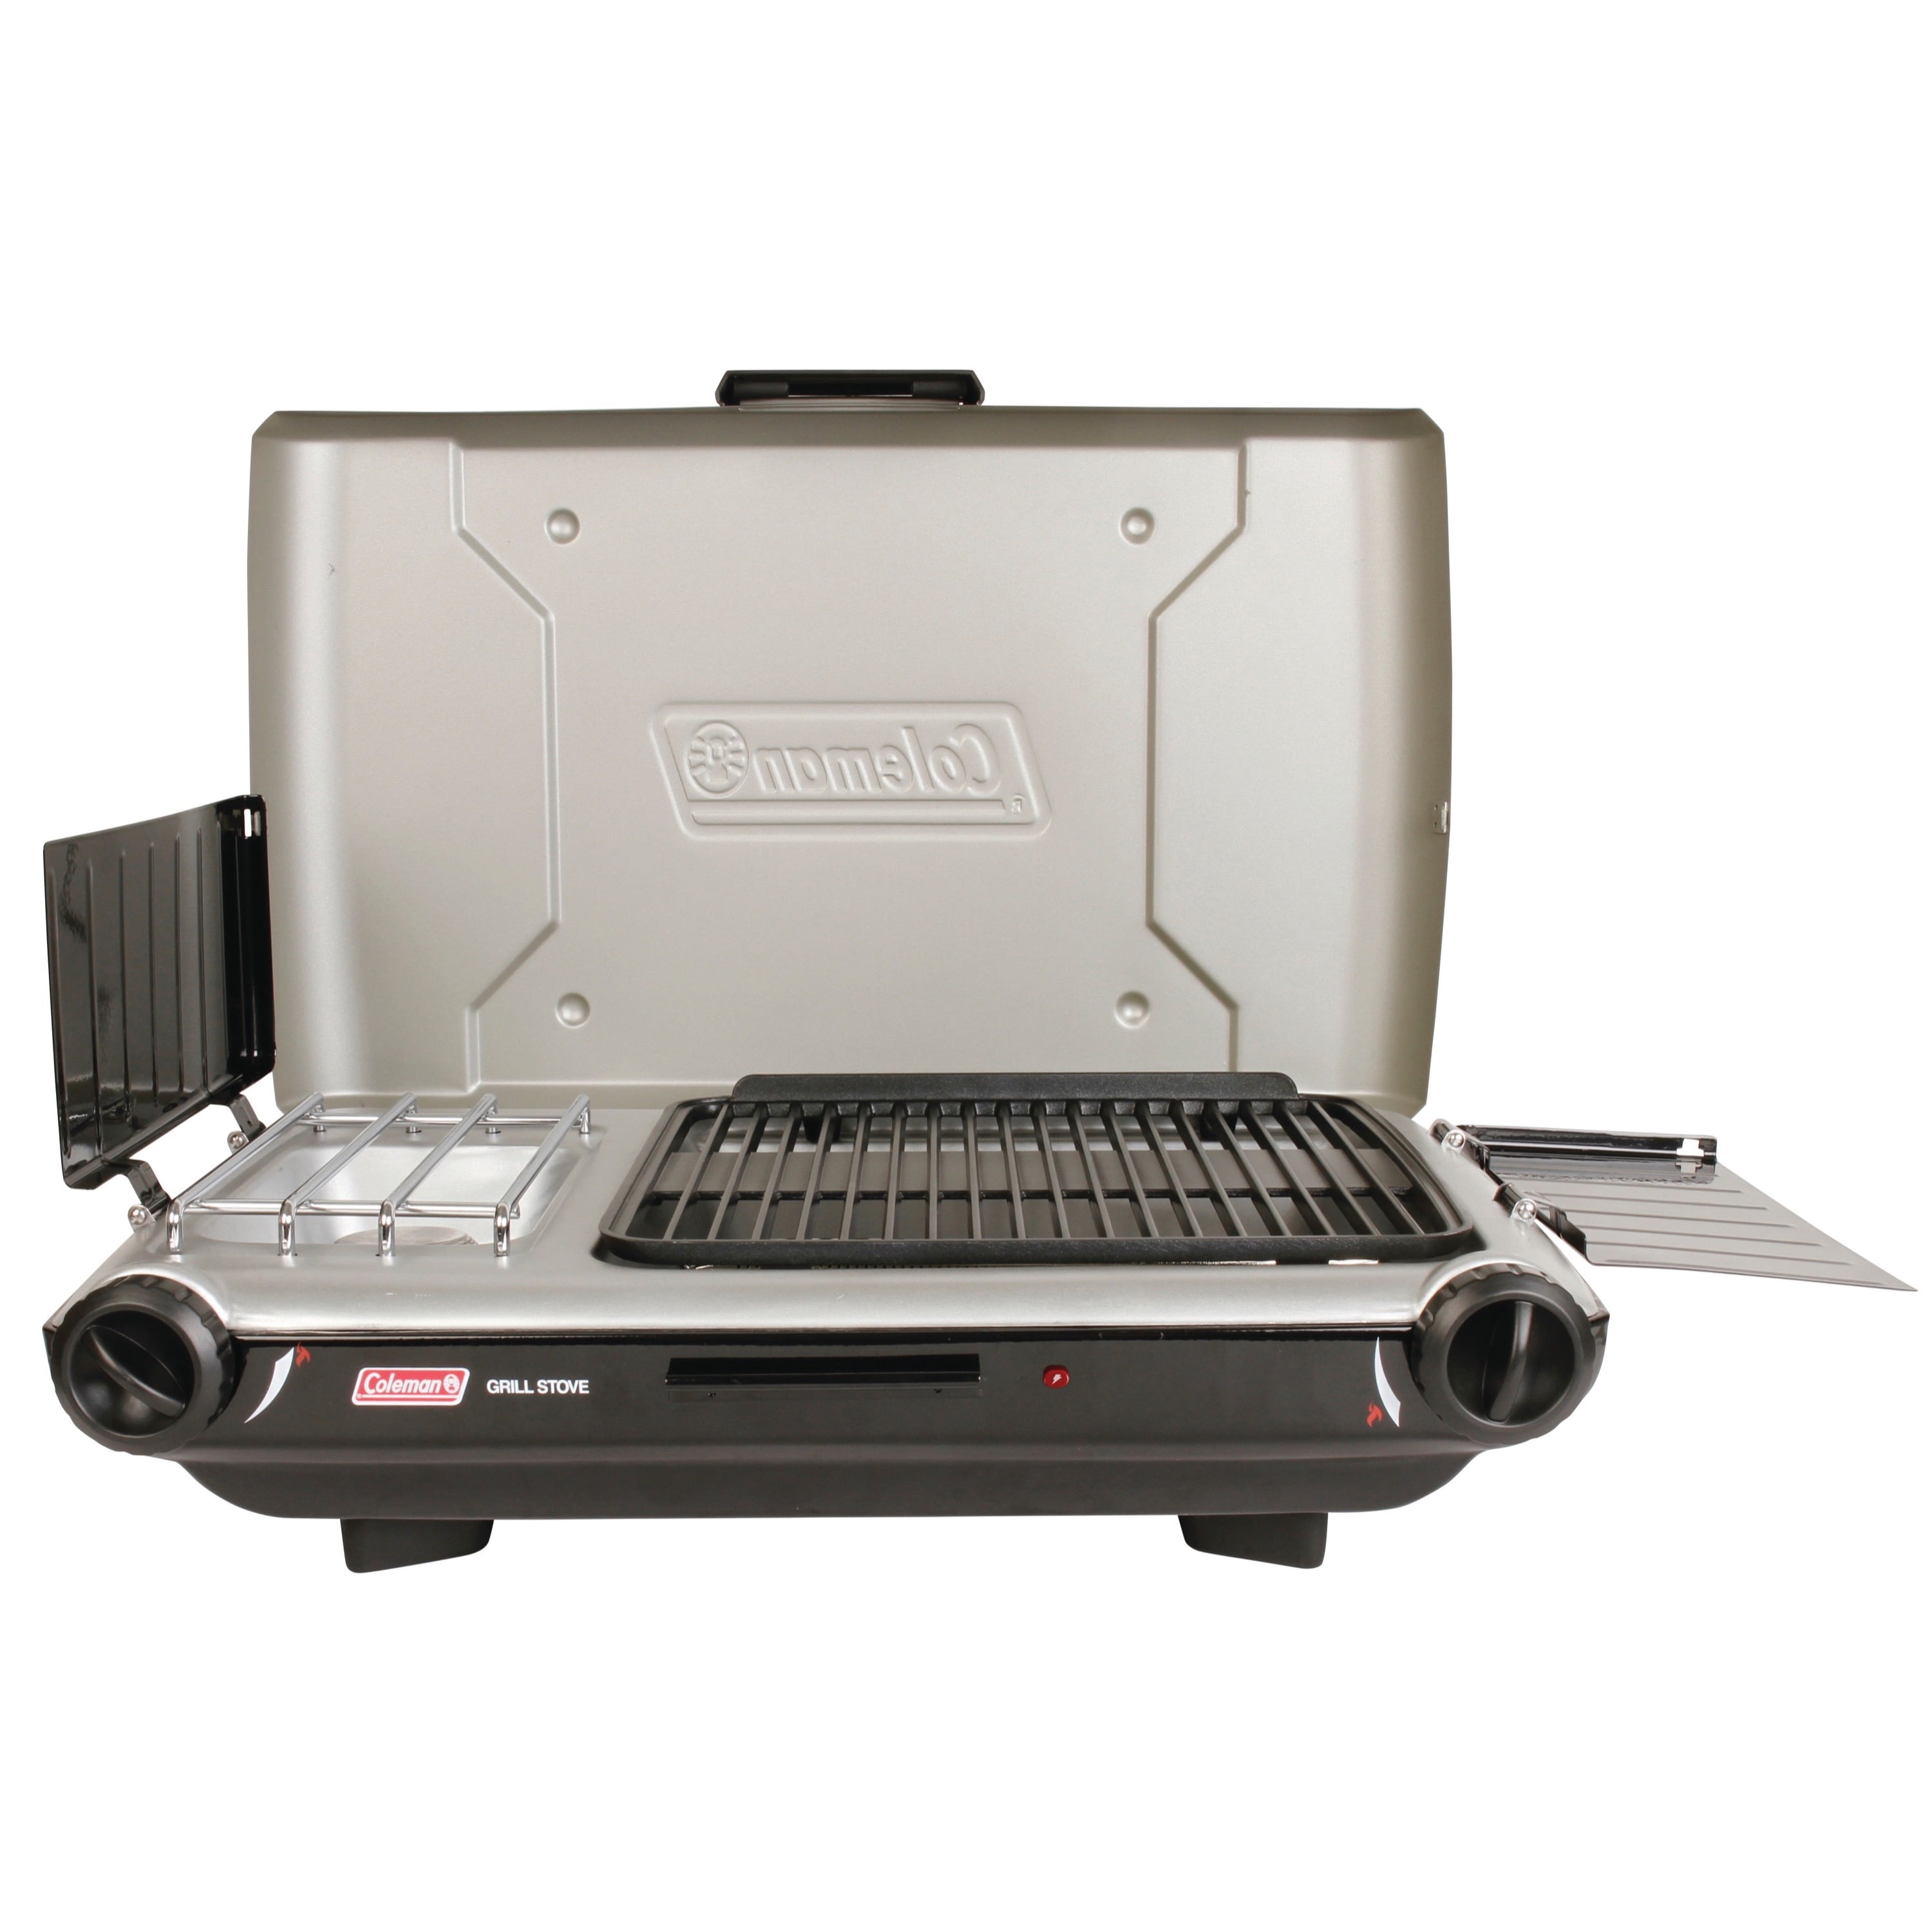 Coleman Tabletop Propane Gas Camping 2-in-1 Grill/Stove 2-Burner, Gray